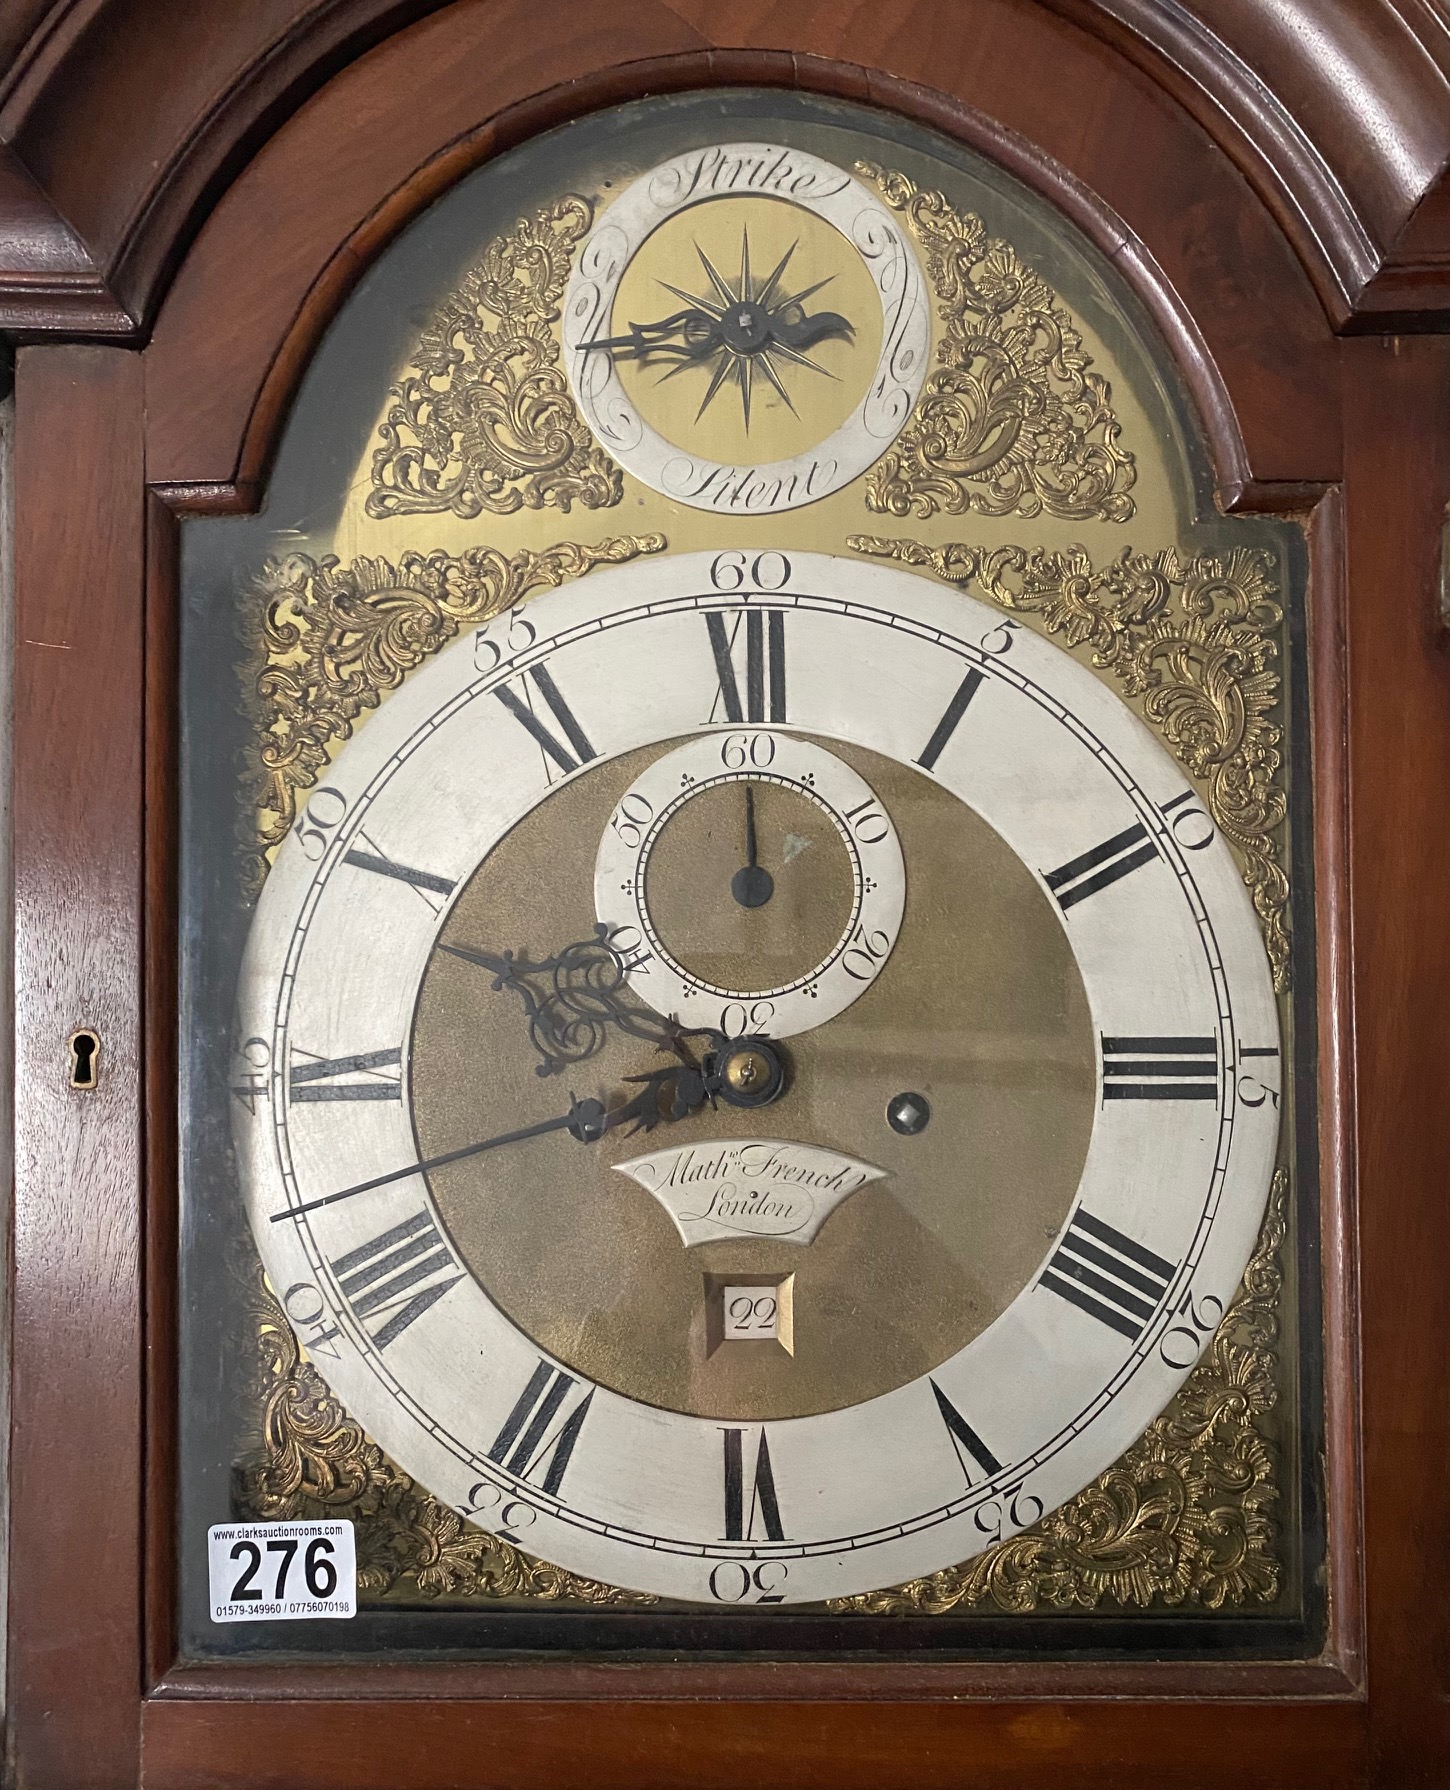 A c.1800 Matthew French, London, mahogany long case clock with brass & silvered dial, 93in tall - Image 2 of 5